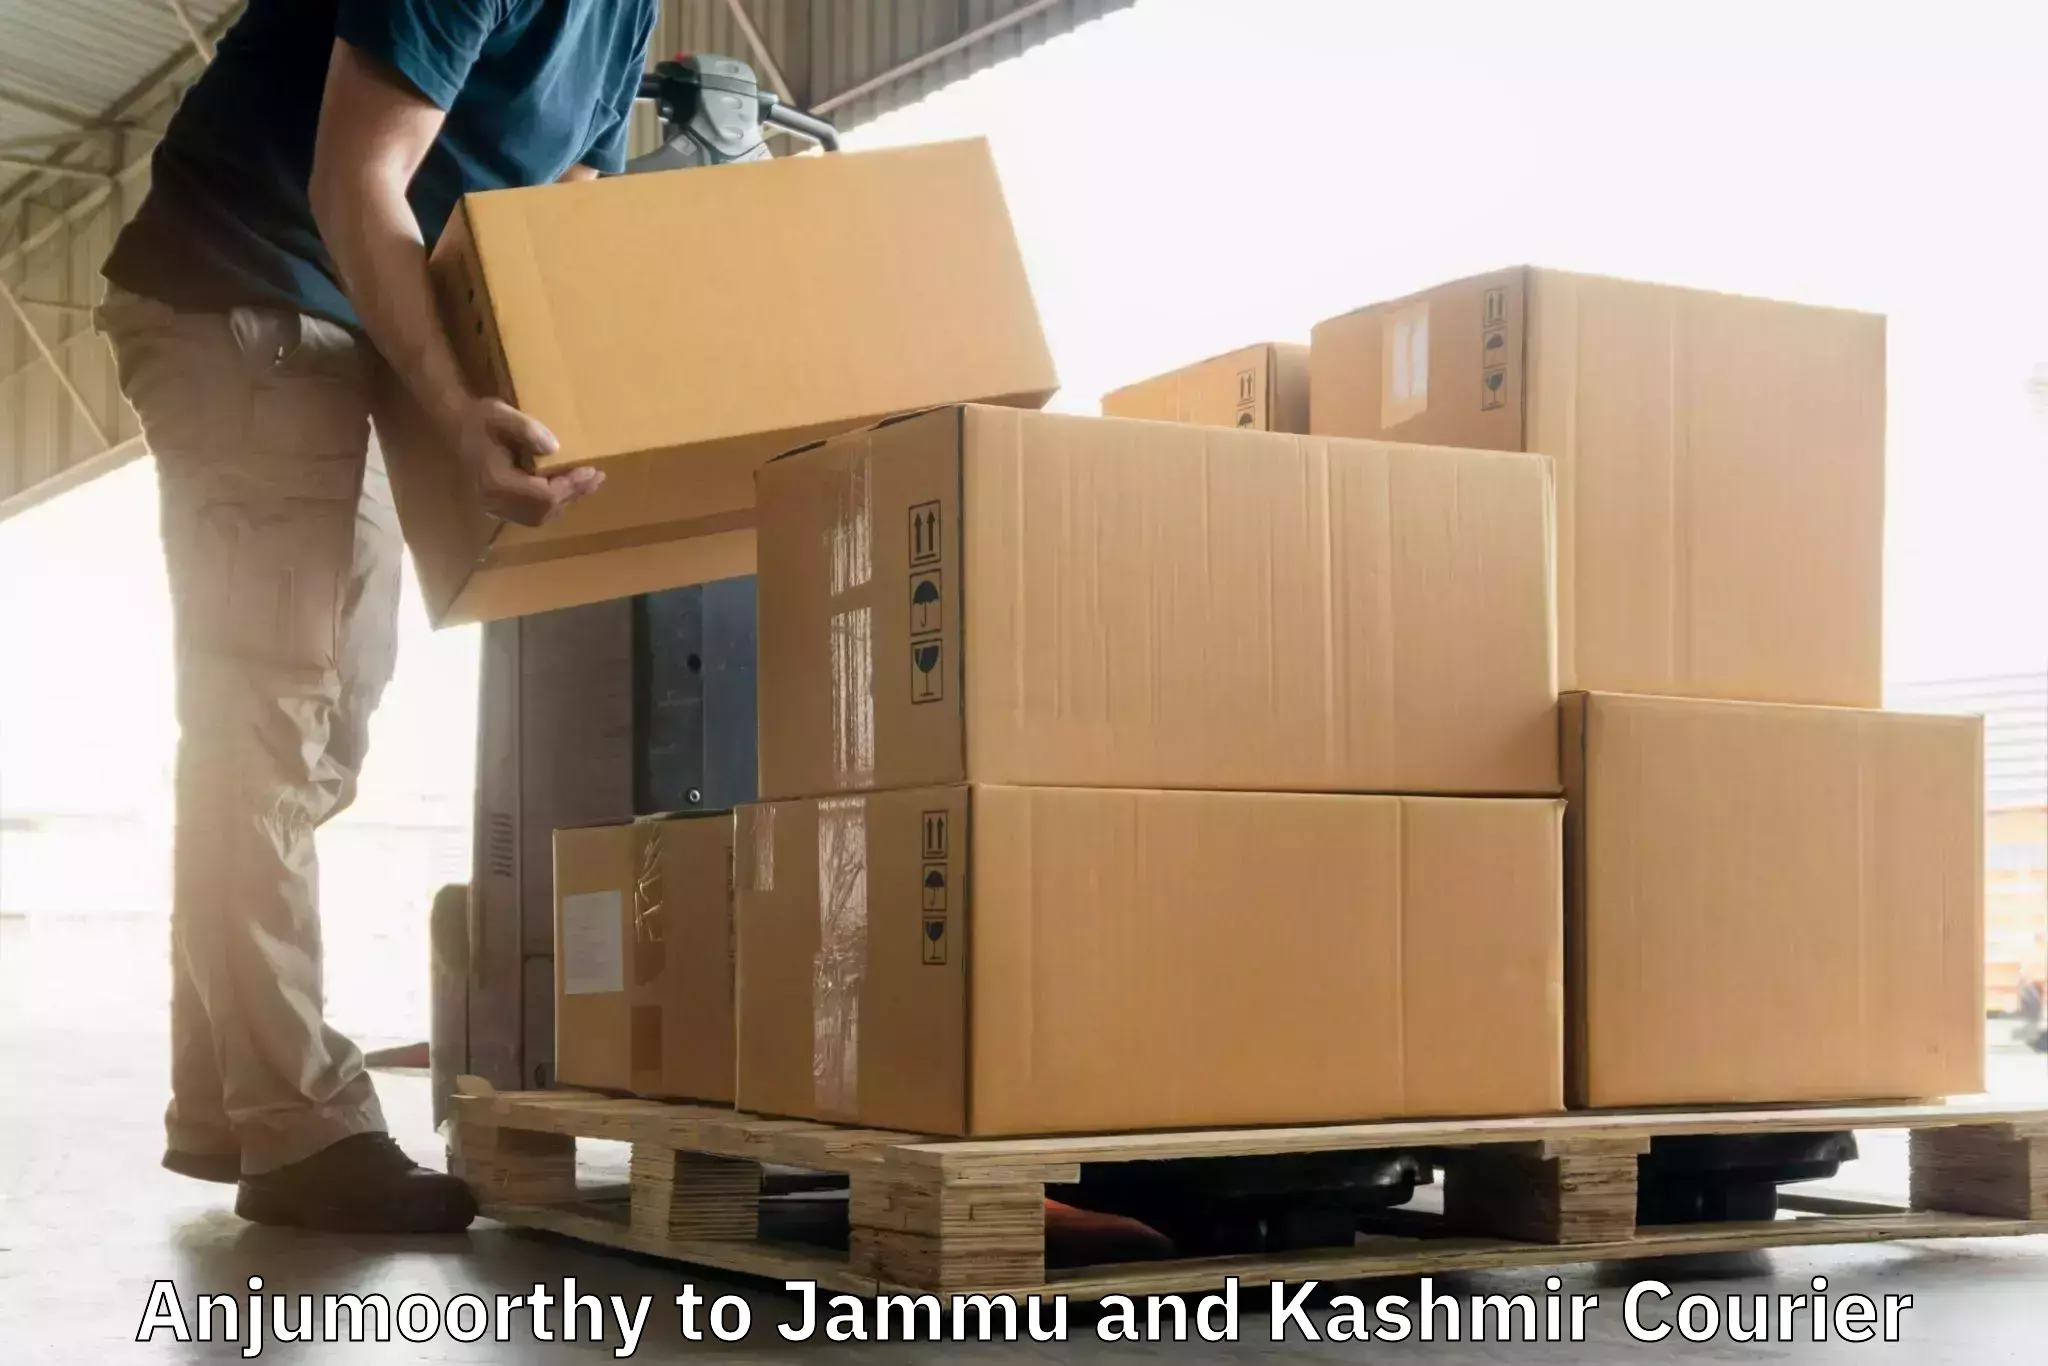 Courier tracking online Anjumoorthy to Budgam